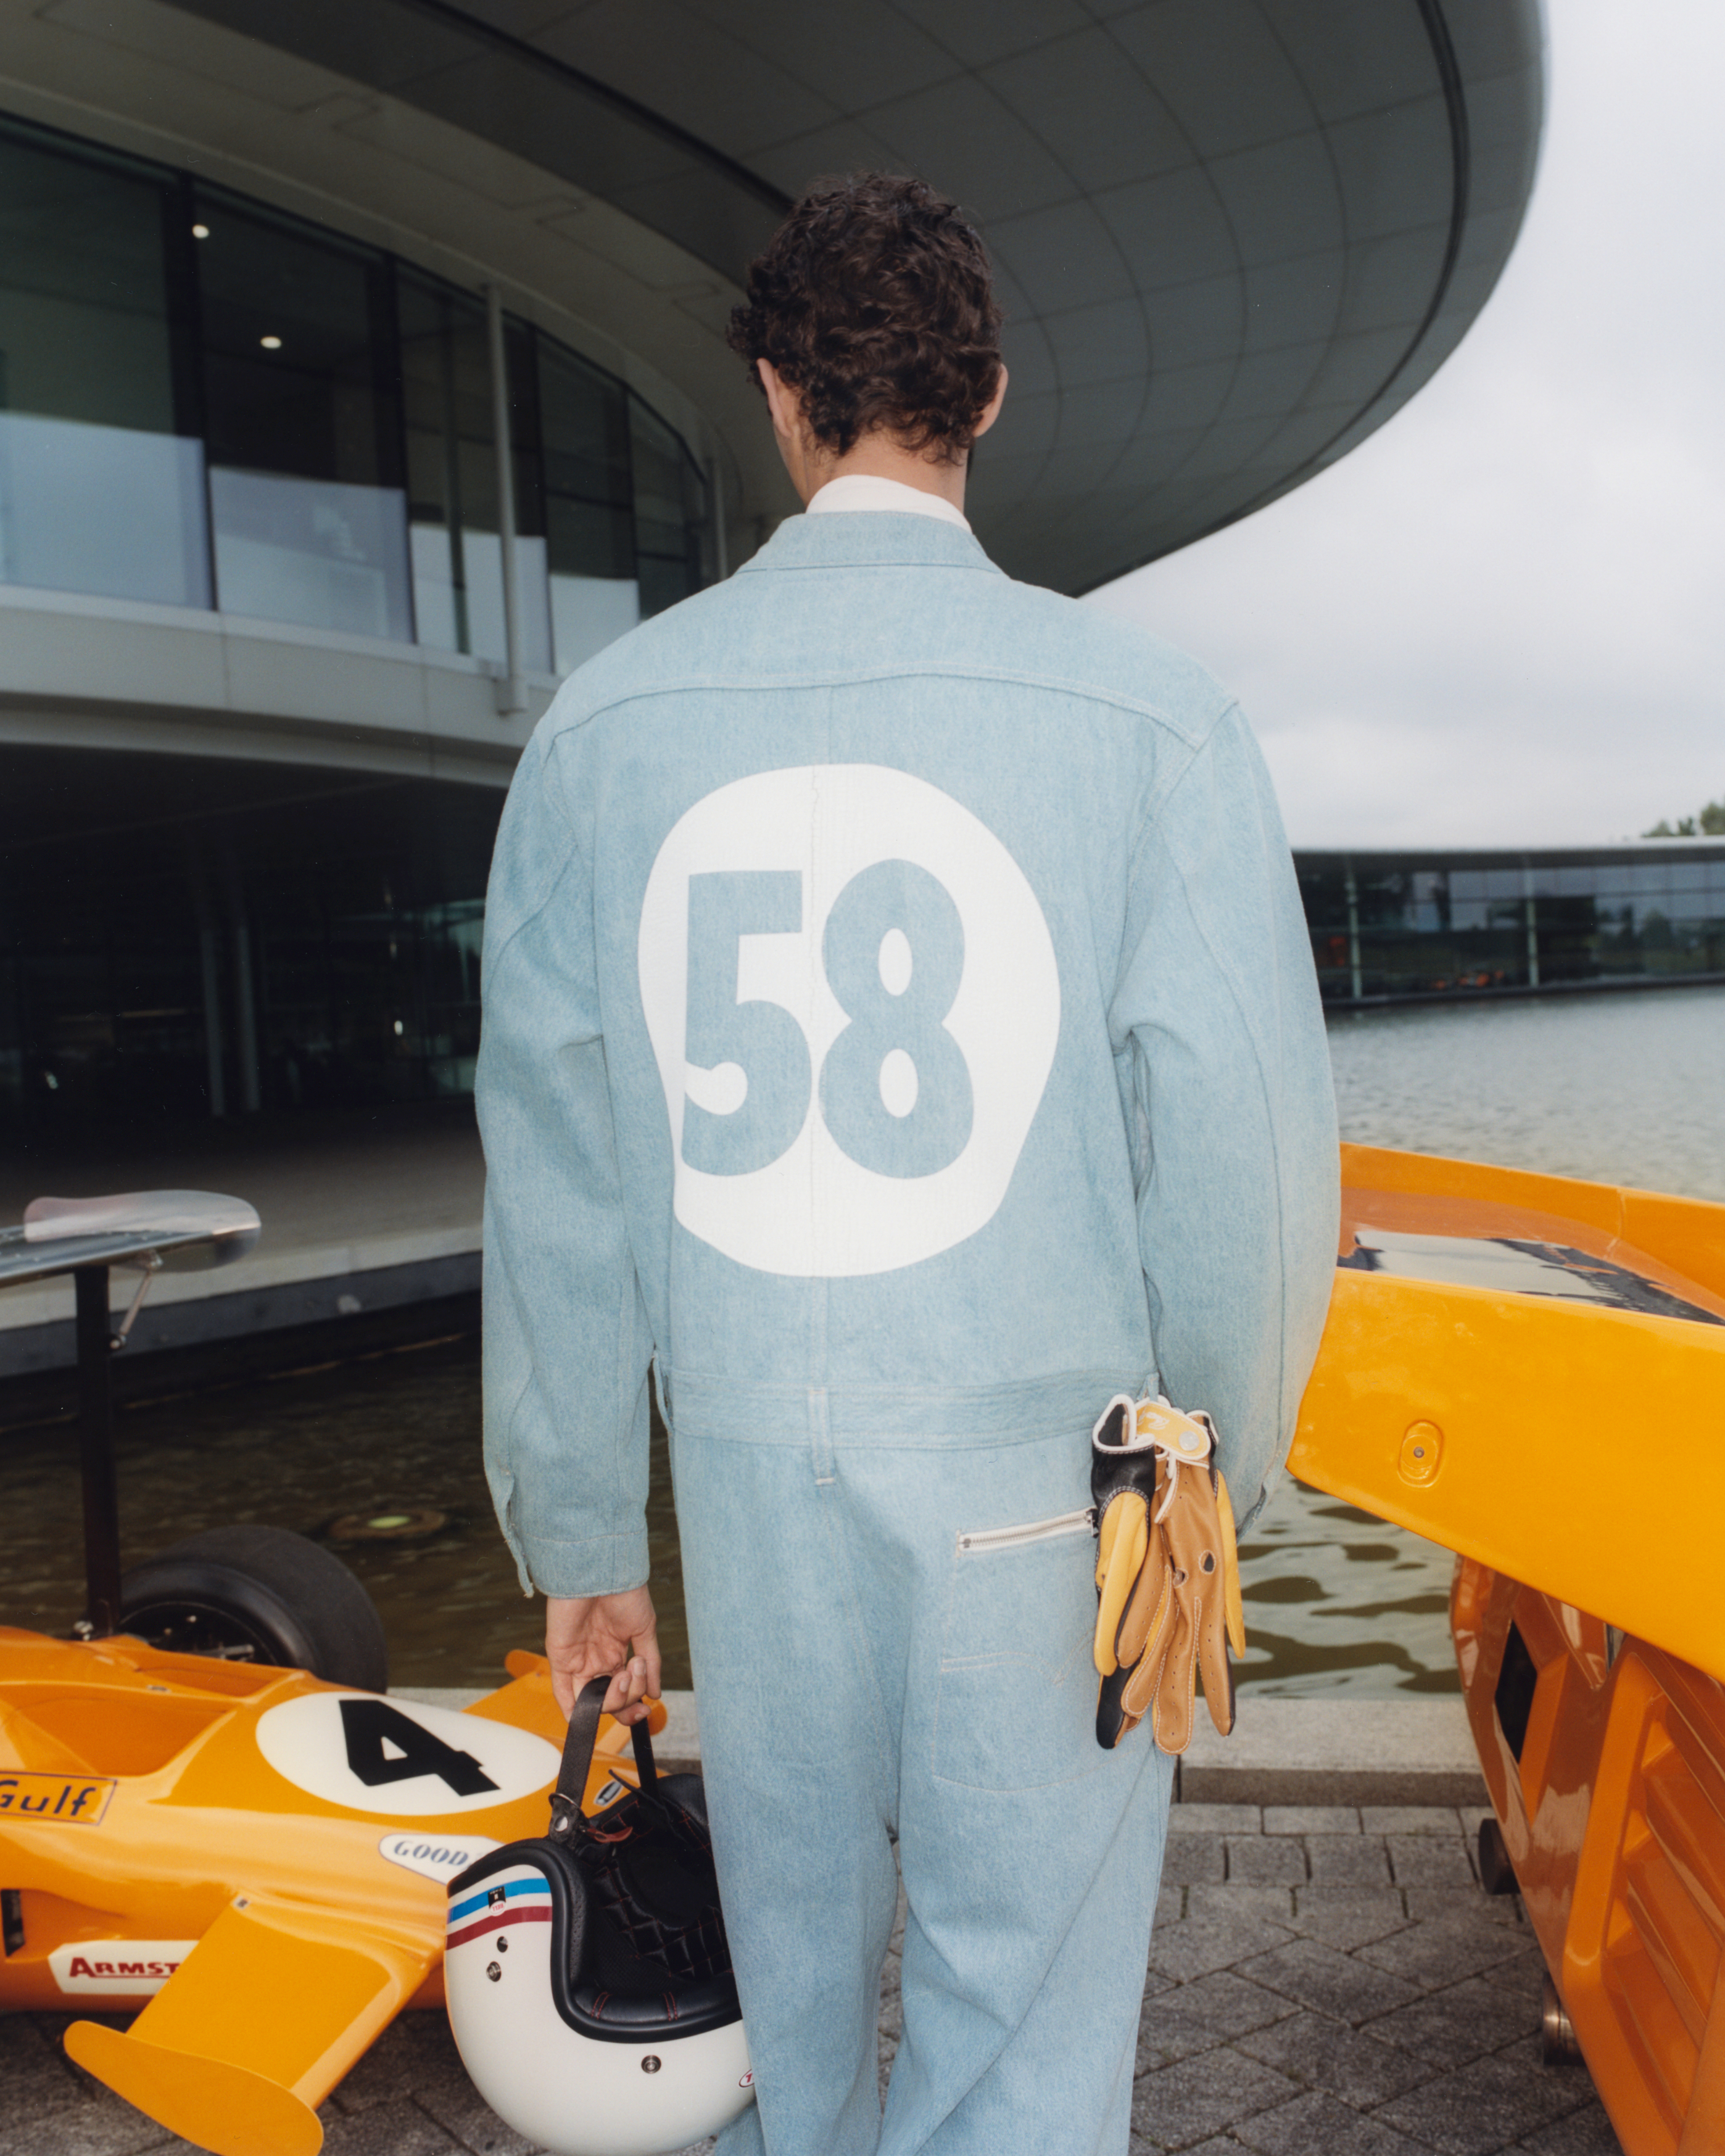 A person is standing with their back to the camera wearing a denim jumpsuit with the number 58 on it, holding gloves and a helmet next to an orange car